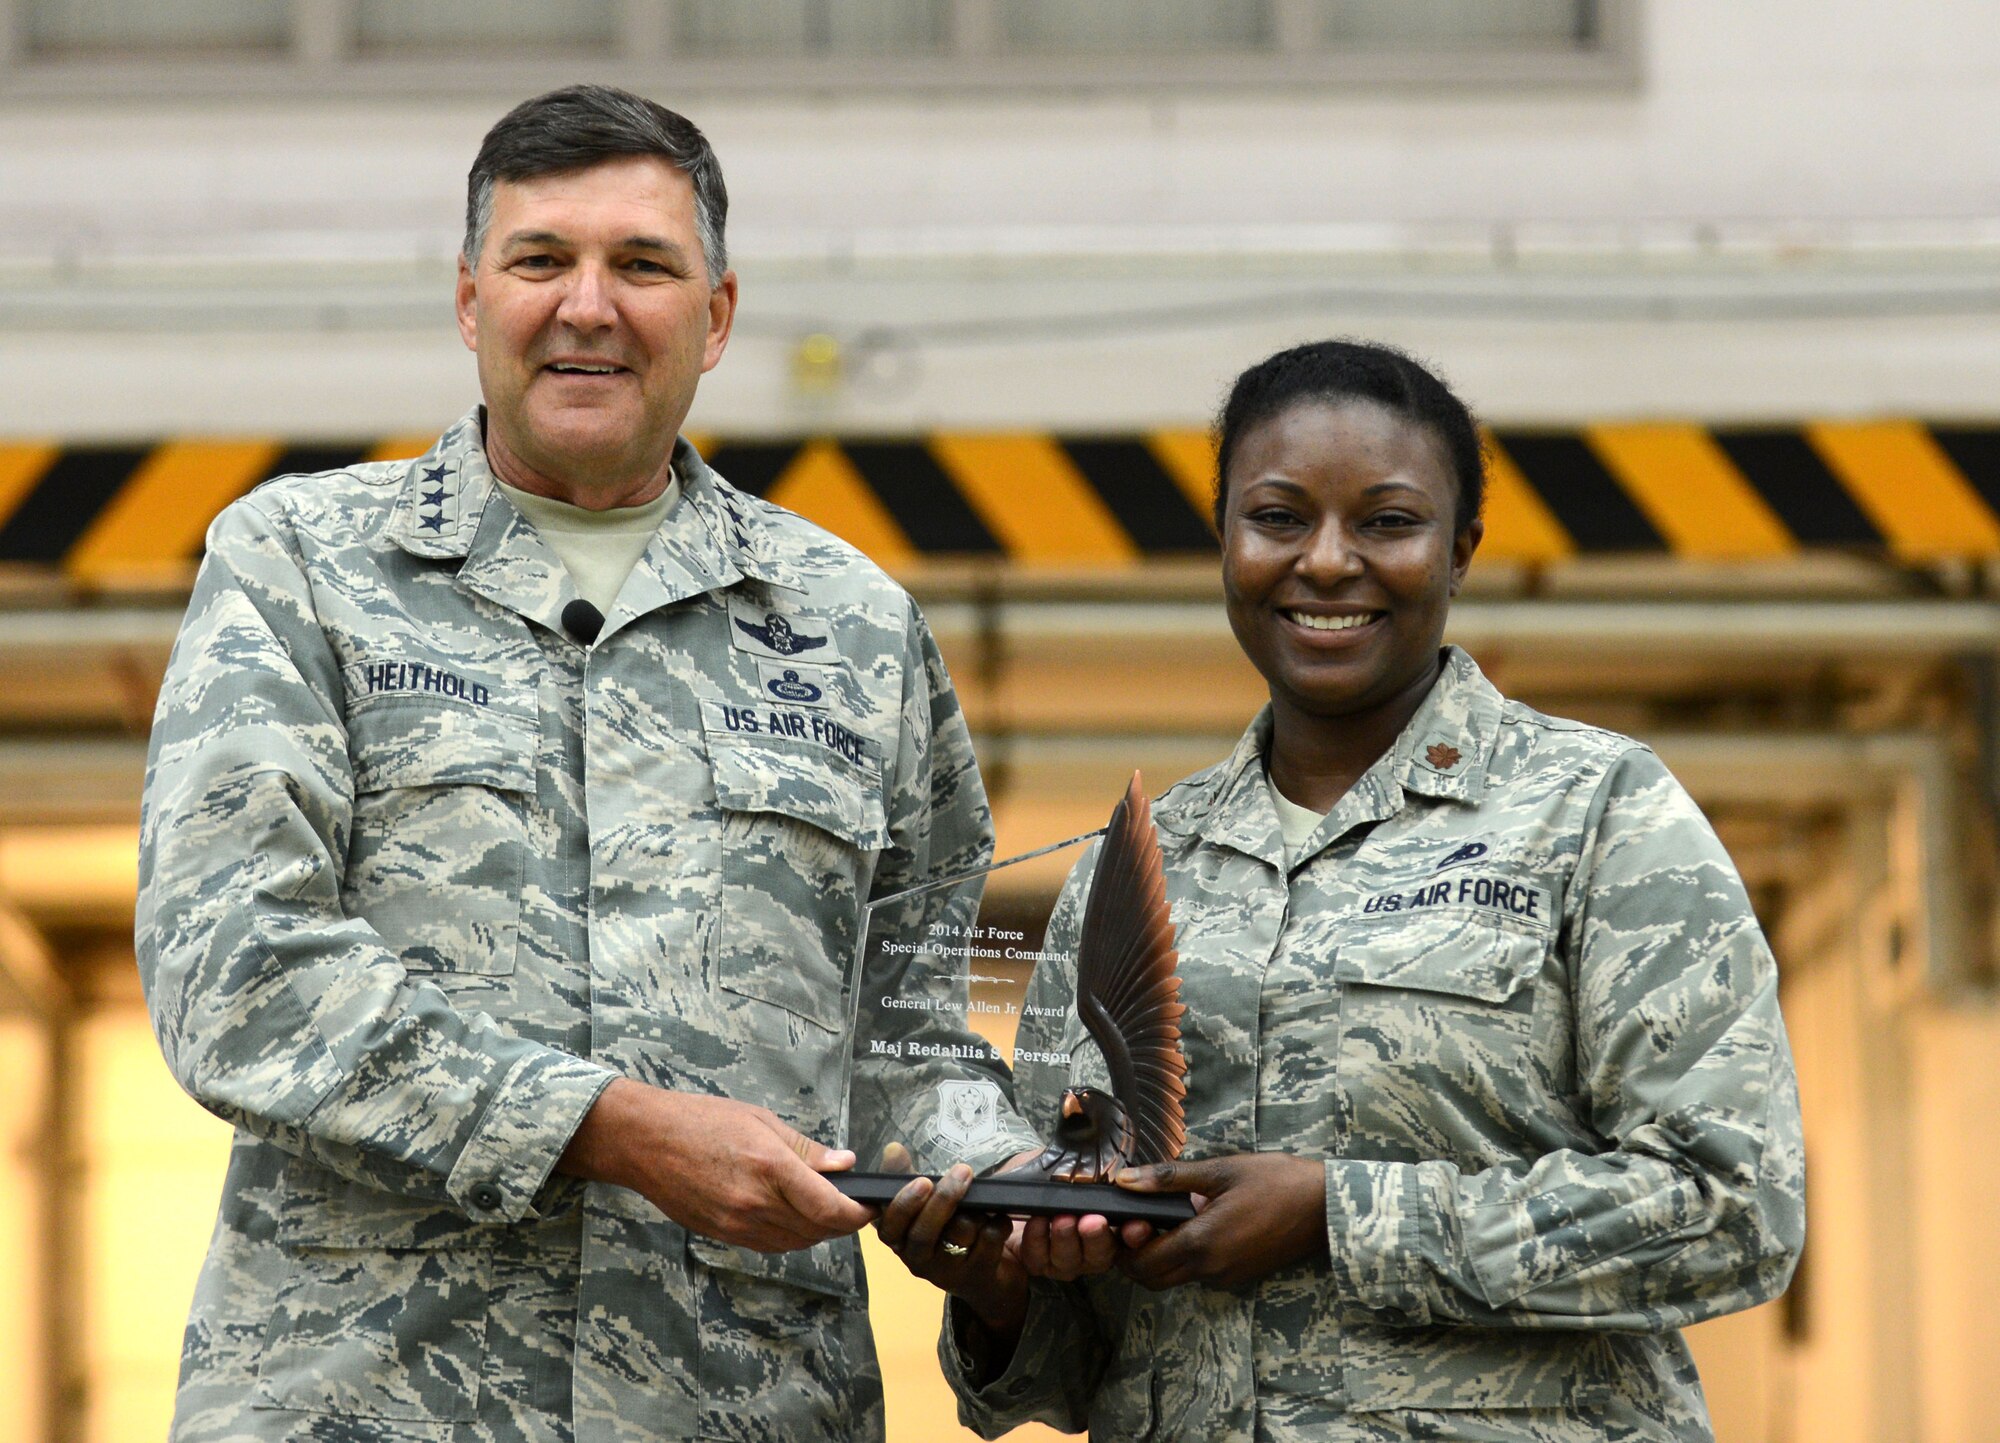 Lt. Gen. Brad Heithold, commander of Air Force Special Operations Command, congratulates Maj. Redahlia Person, 352nd Special Operations Maintenance Squadron maintenance operations officer, on becoming the Air Force-level recipient of the 2014 Gen. Lew Allen Jr. Trophy. The trophy is awarded annually to a base-level maintenance officer and senior NCO with outstanding contributions to sortie generation. After being recognized at the base level, nominees continue to compete at the major command and then Air Force level. (U.S. Air Force photo by Senior Airman Katherine Maurer/Released)
